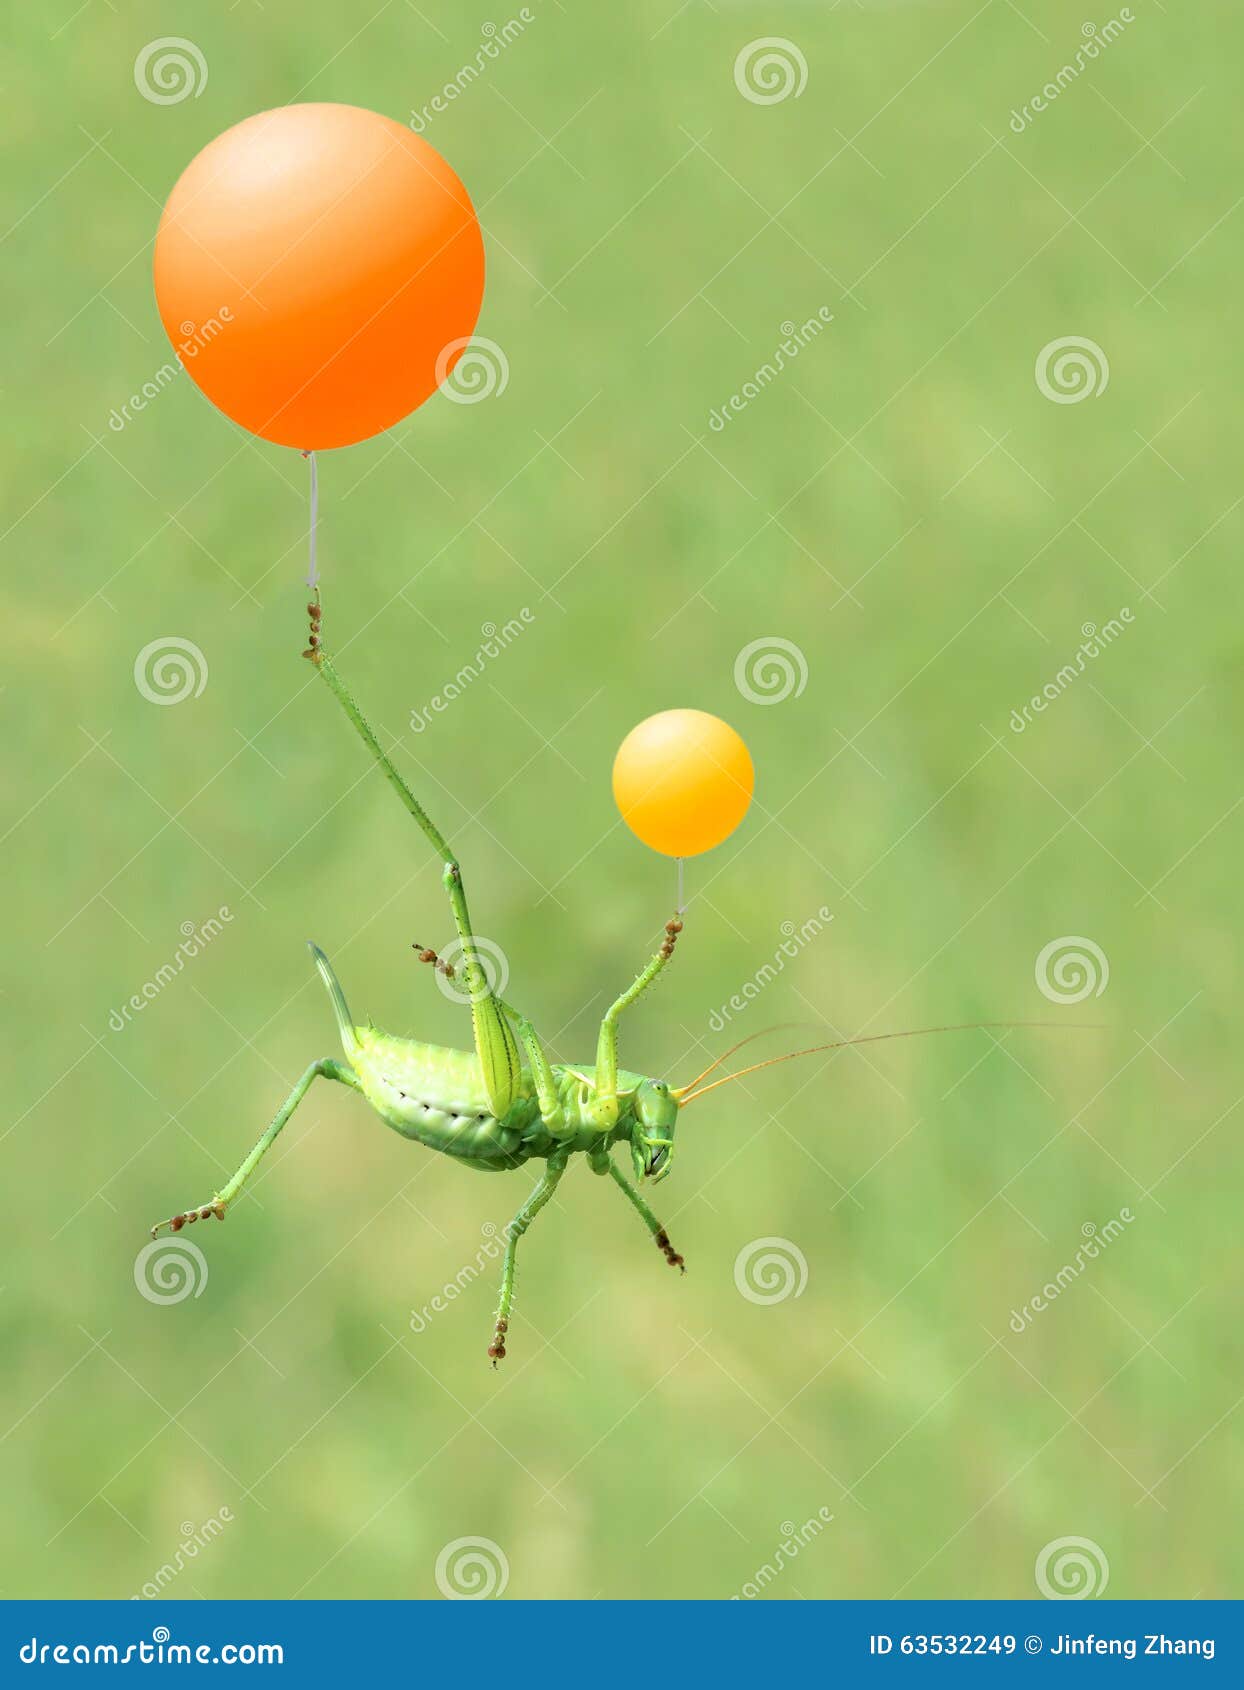 green cricket and airballoon